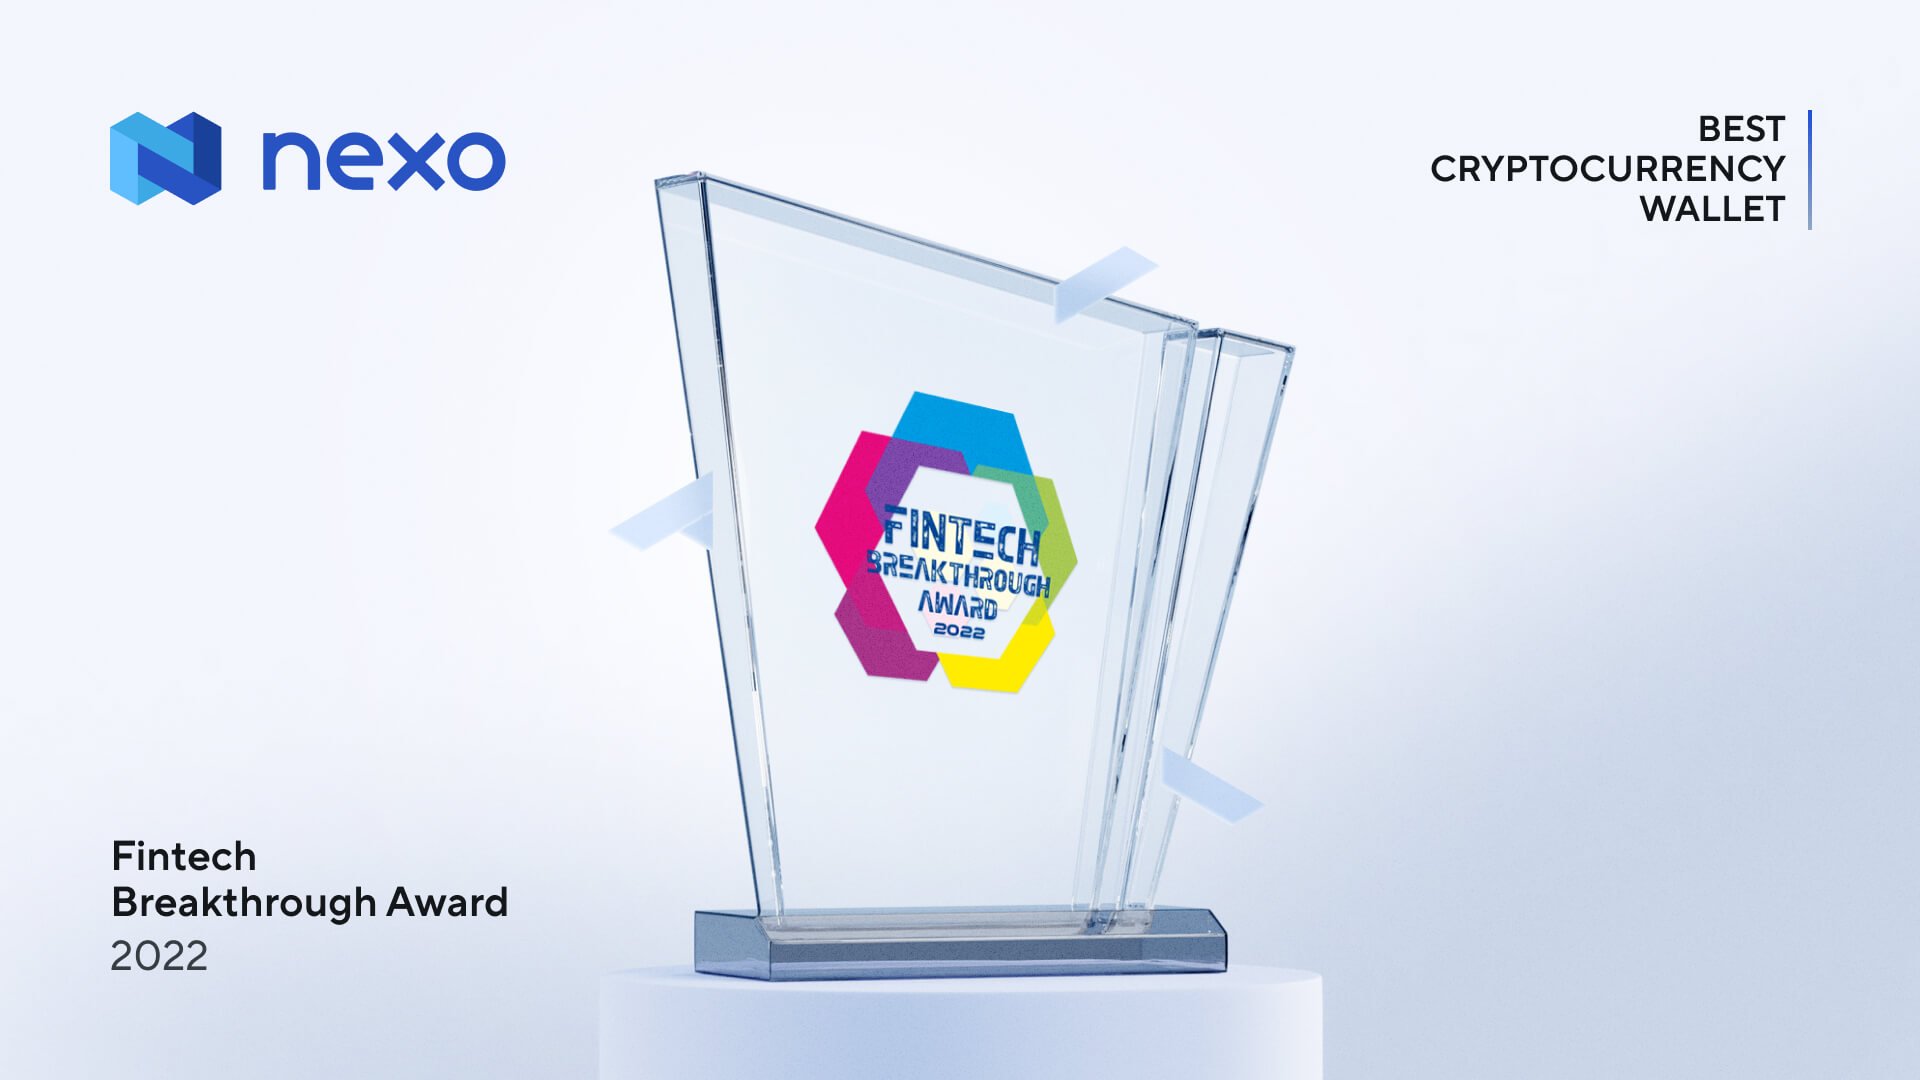 Nexo Awarded “Best Cryptocurrency Wallet” at 2022 FinTech Breakthrough Awards